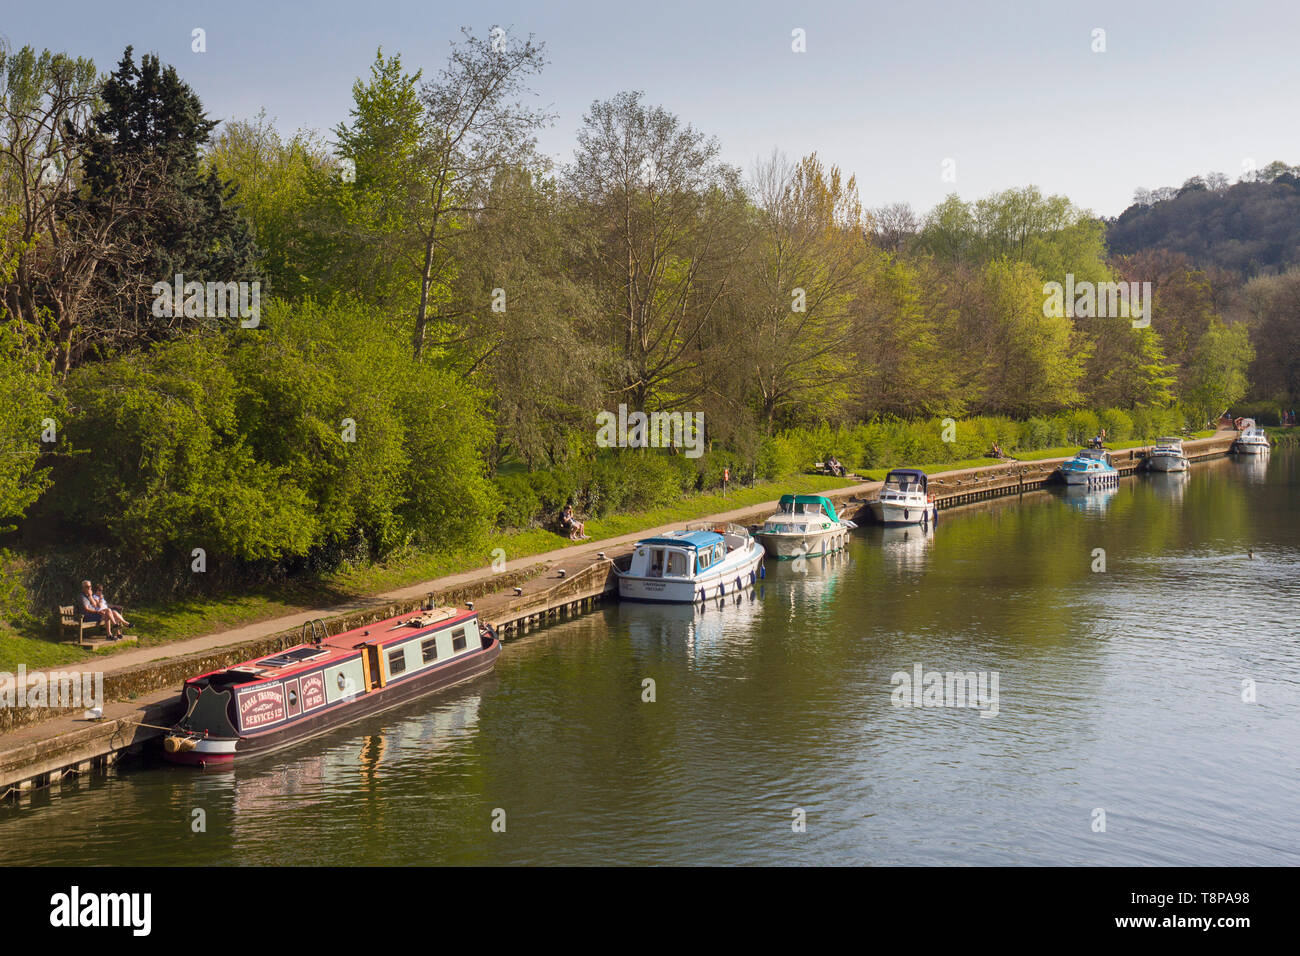 A narrow boat and cabin cruisers moored on the River Thames at Goring-on-Thames Stock Photo